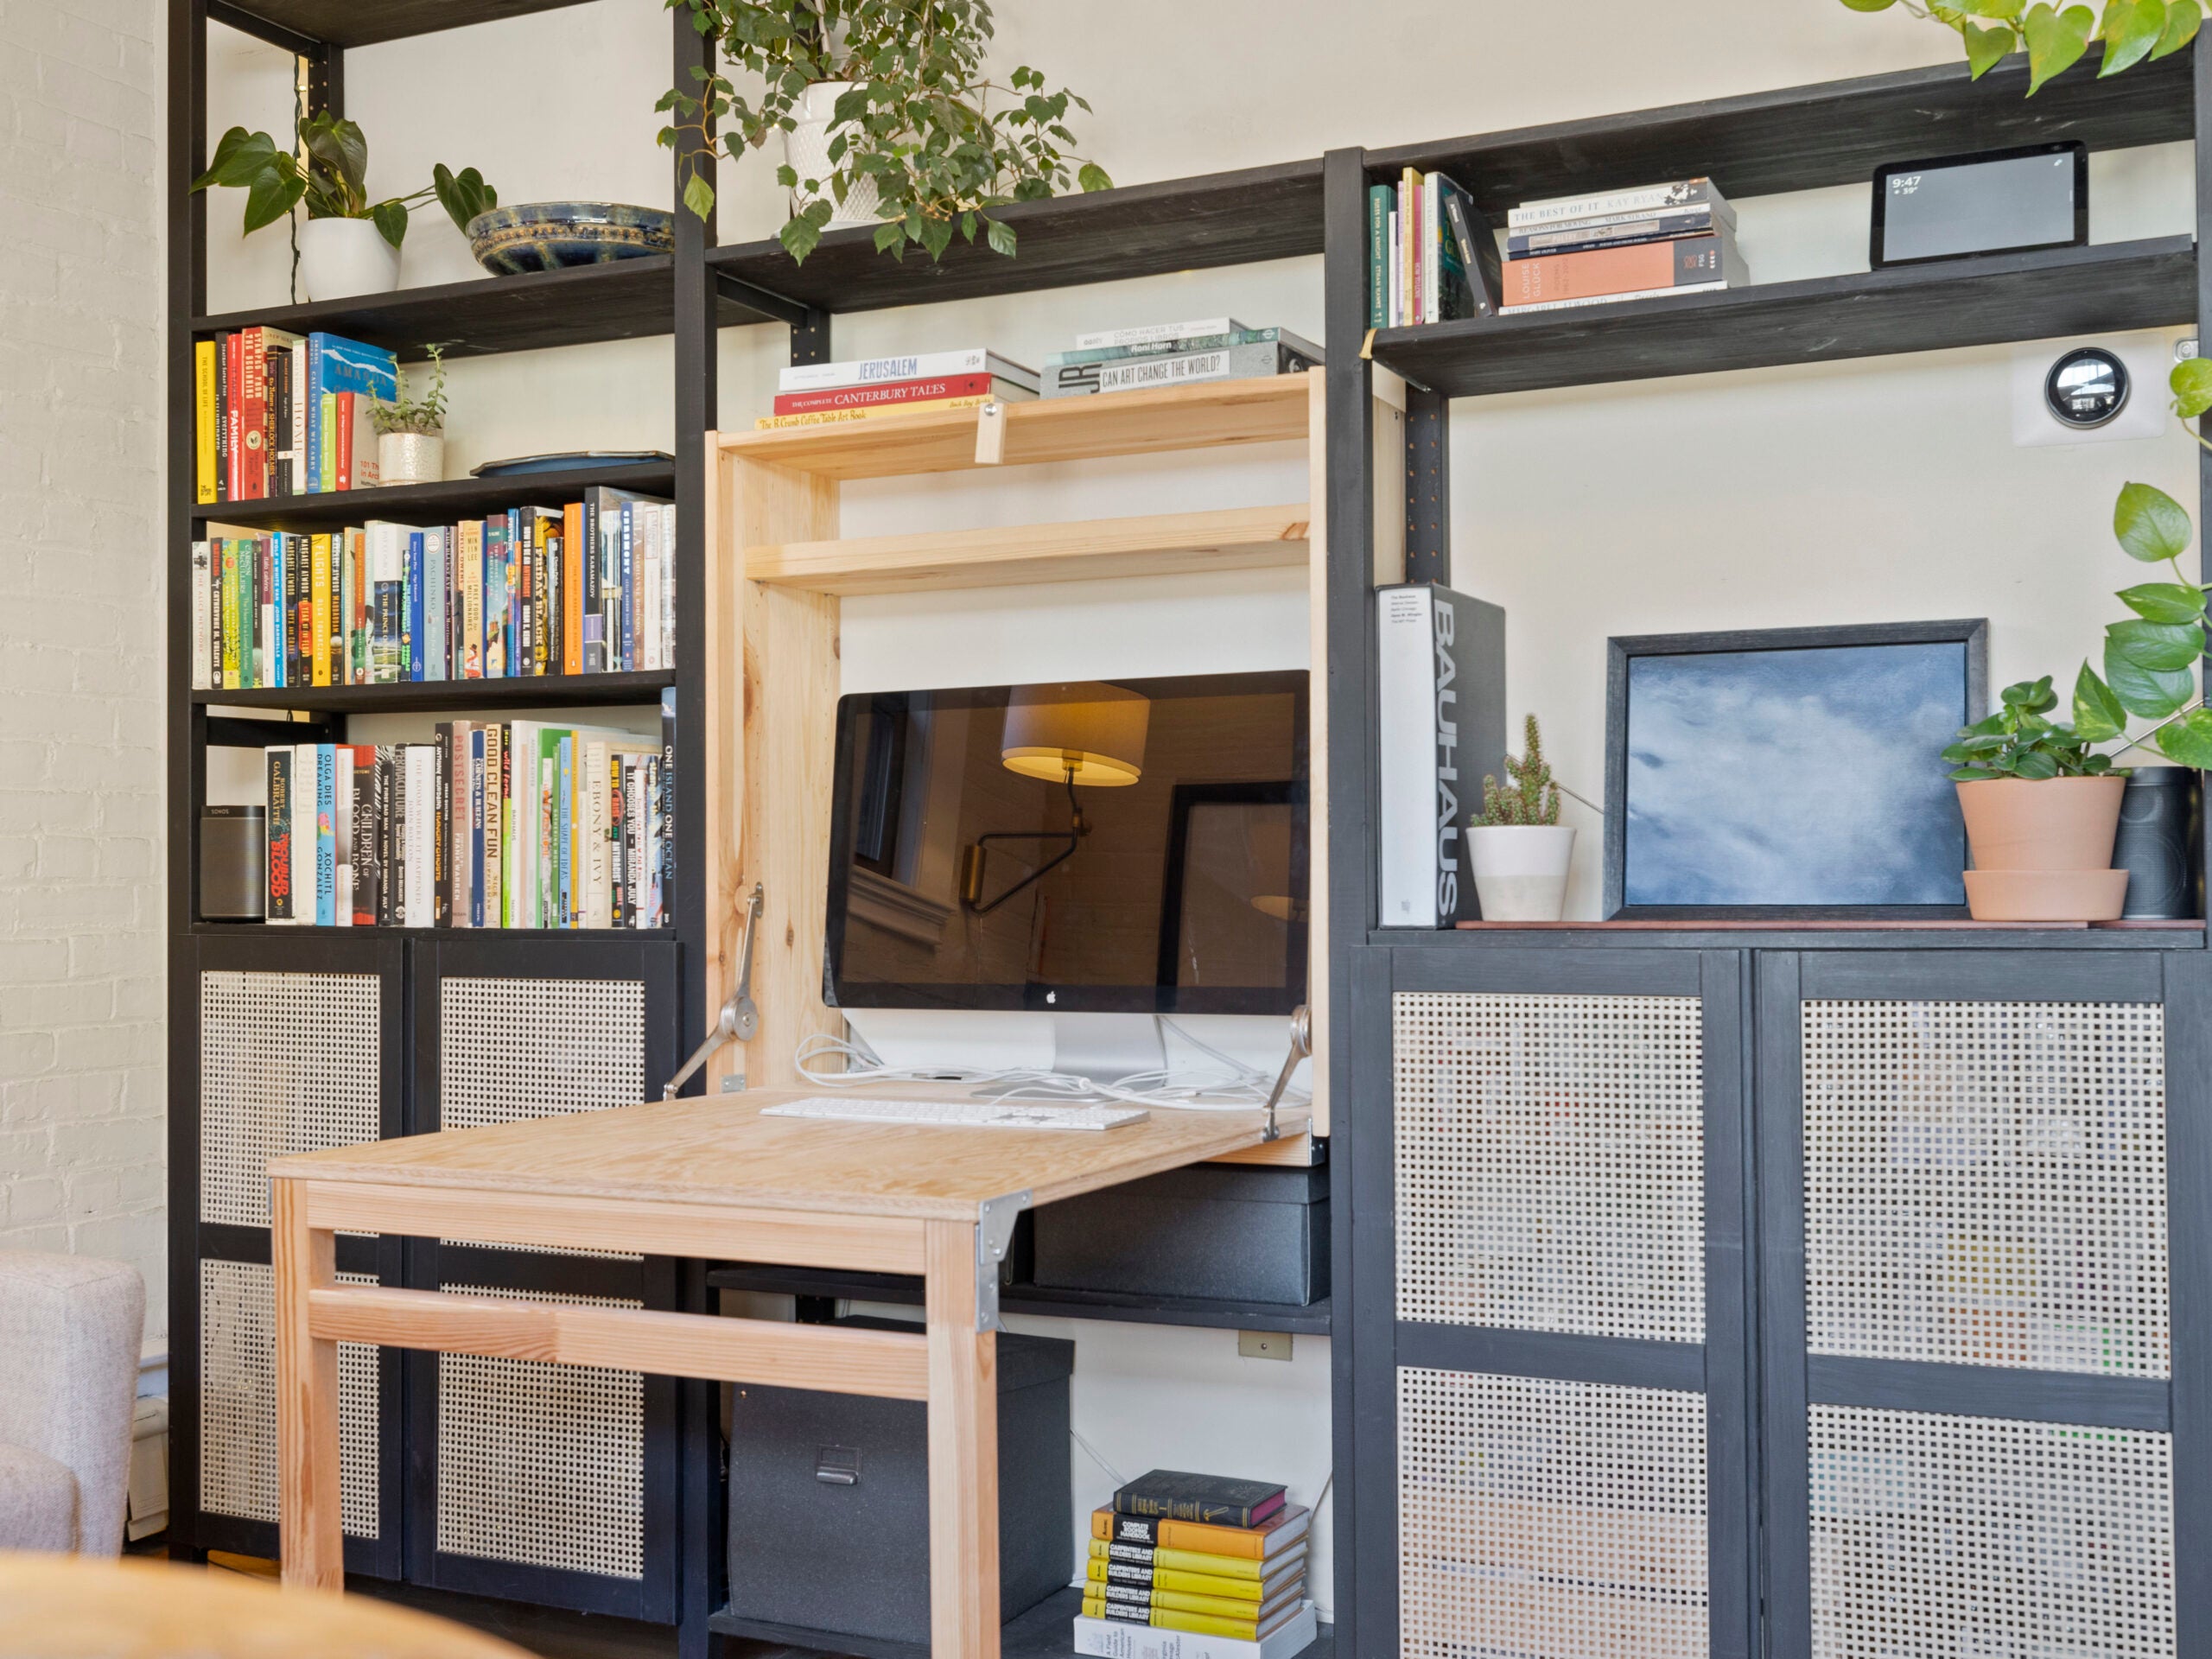 A built-in desk offers a way to open up the space. The shelving surrounding it is black. Some have rattan doors.